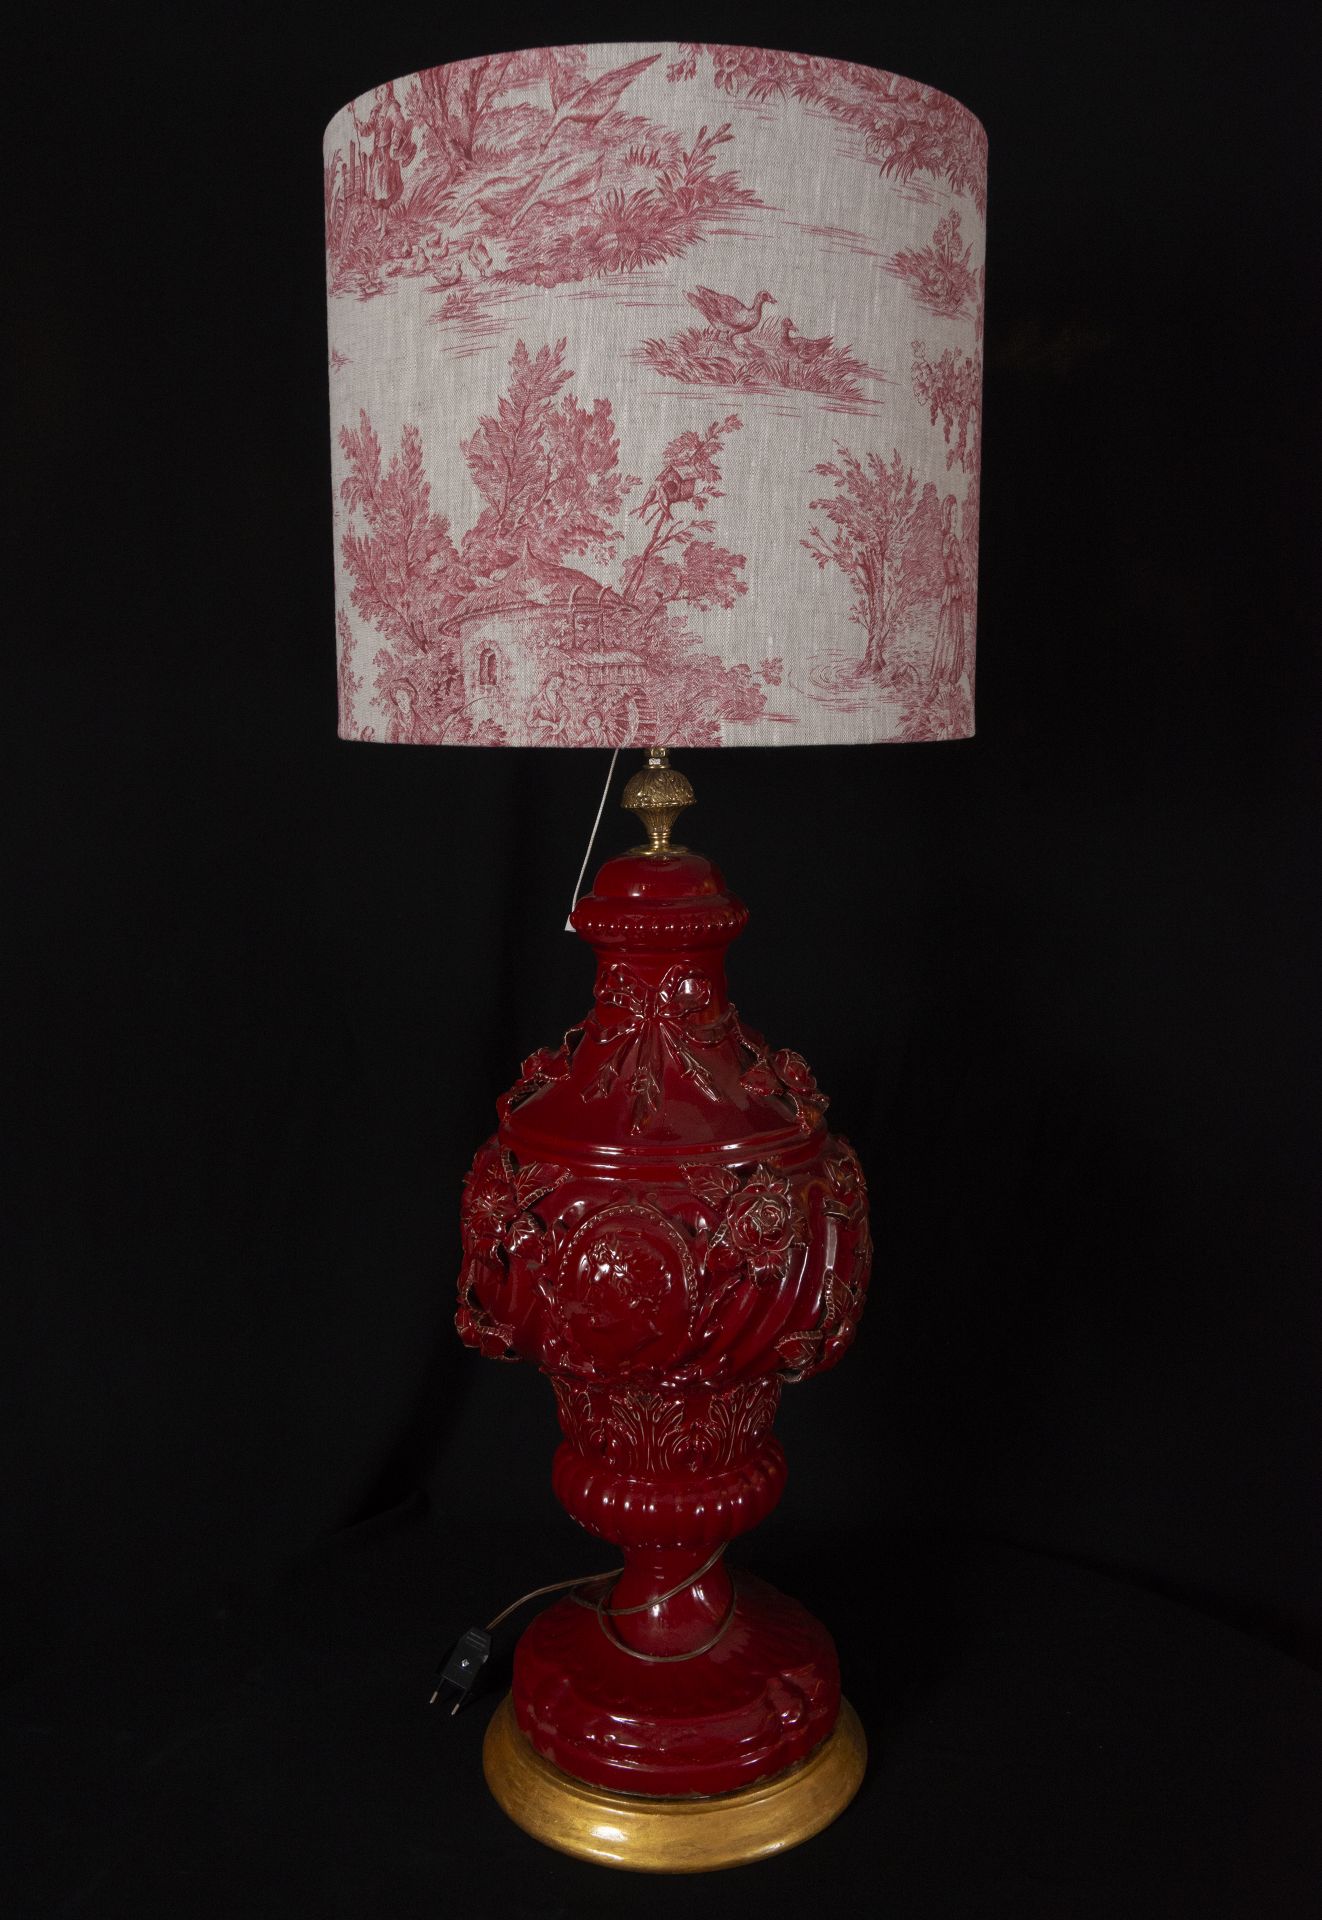 Elegant Pair of Lamps in red glazed ceramic from Manises and Toile de Jouy, 19th century - Image 2 of 5